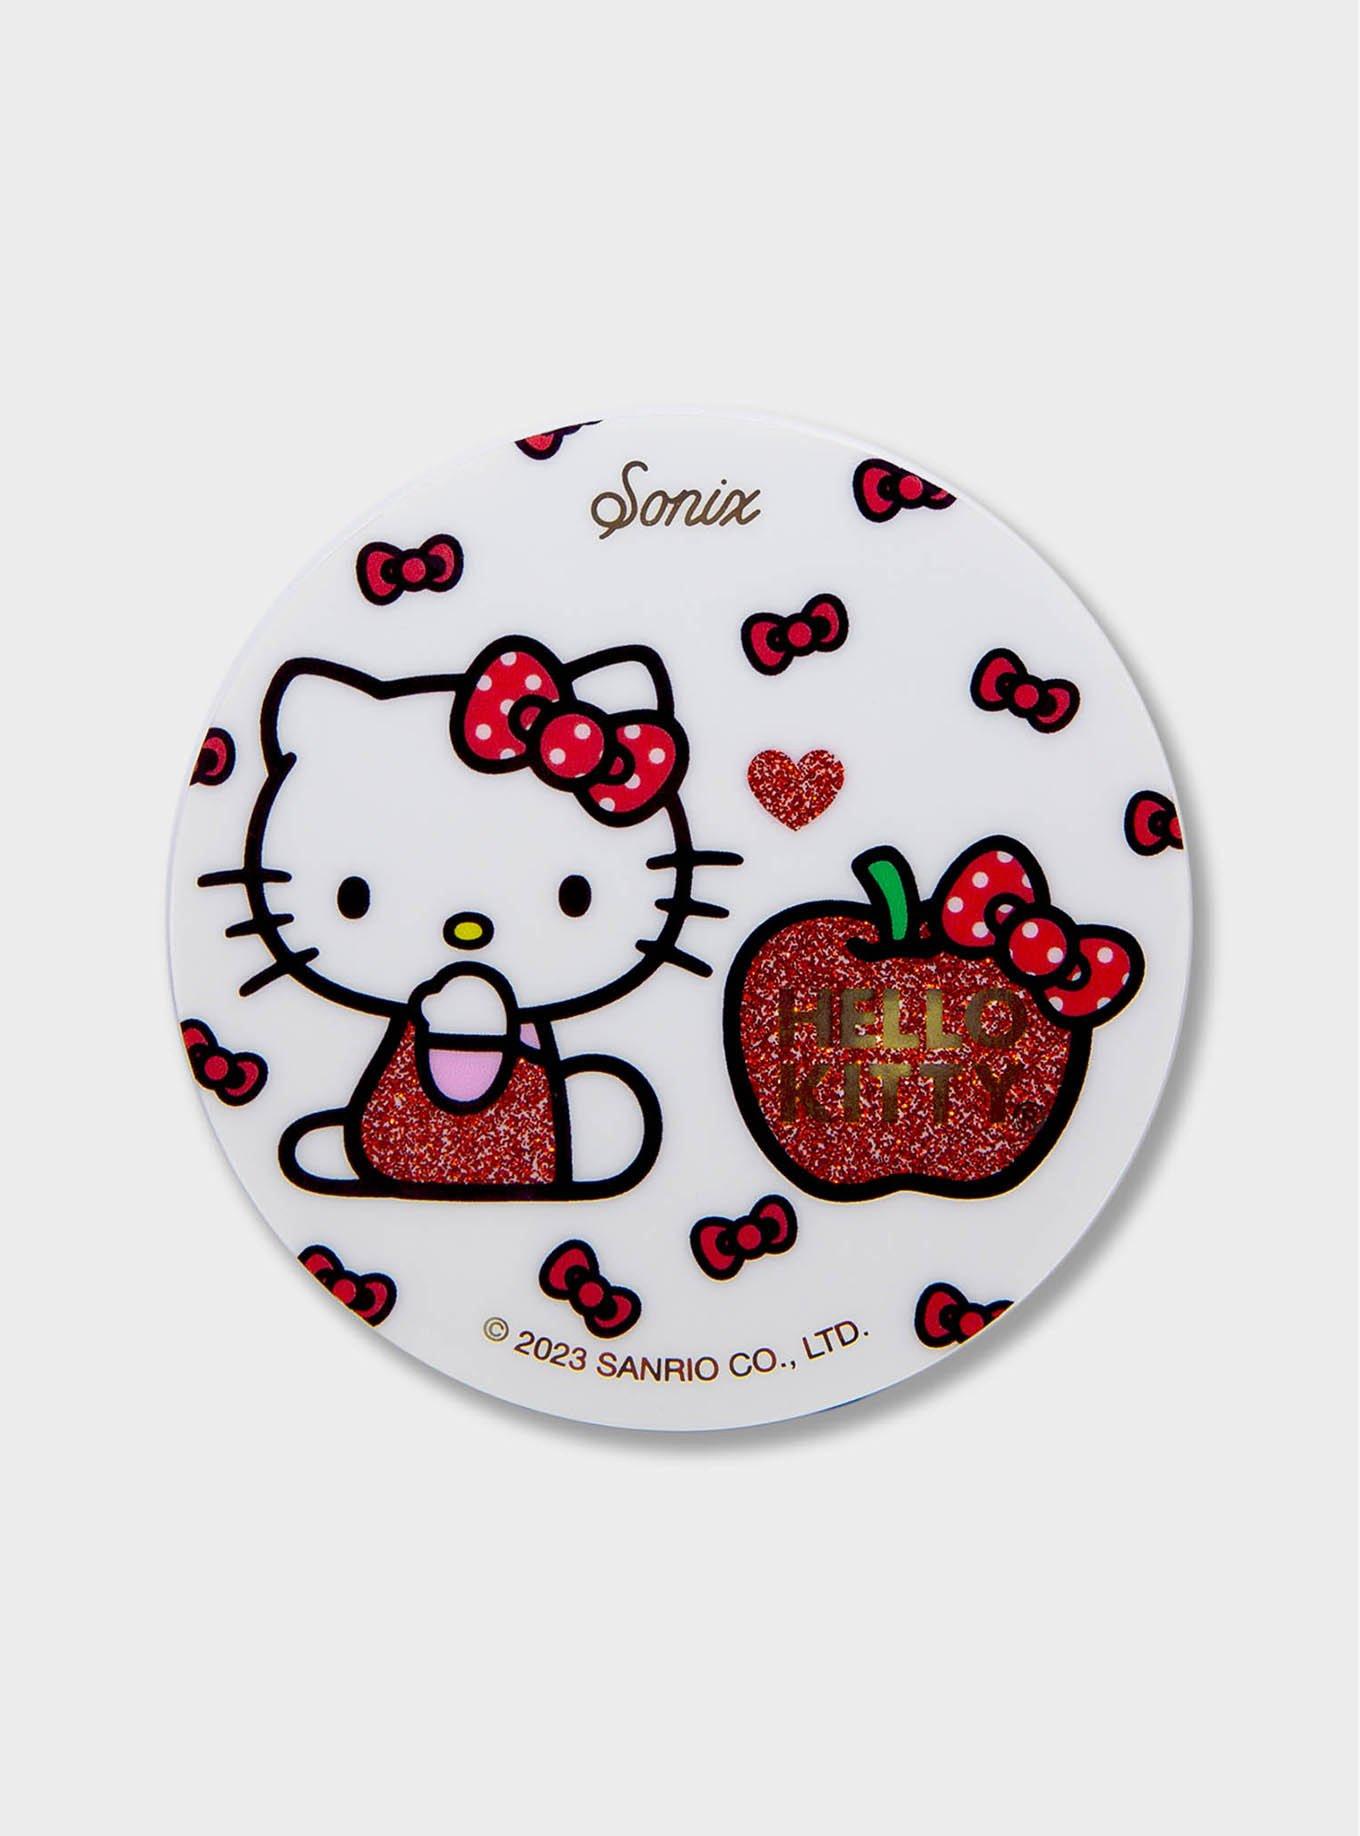 Sonix x Hello Kitty Apples to Apples MagLink Wireless Charger